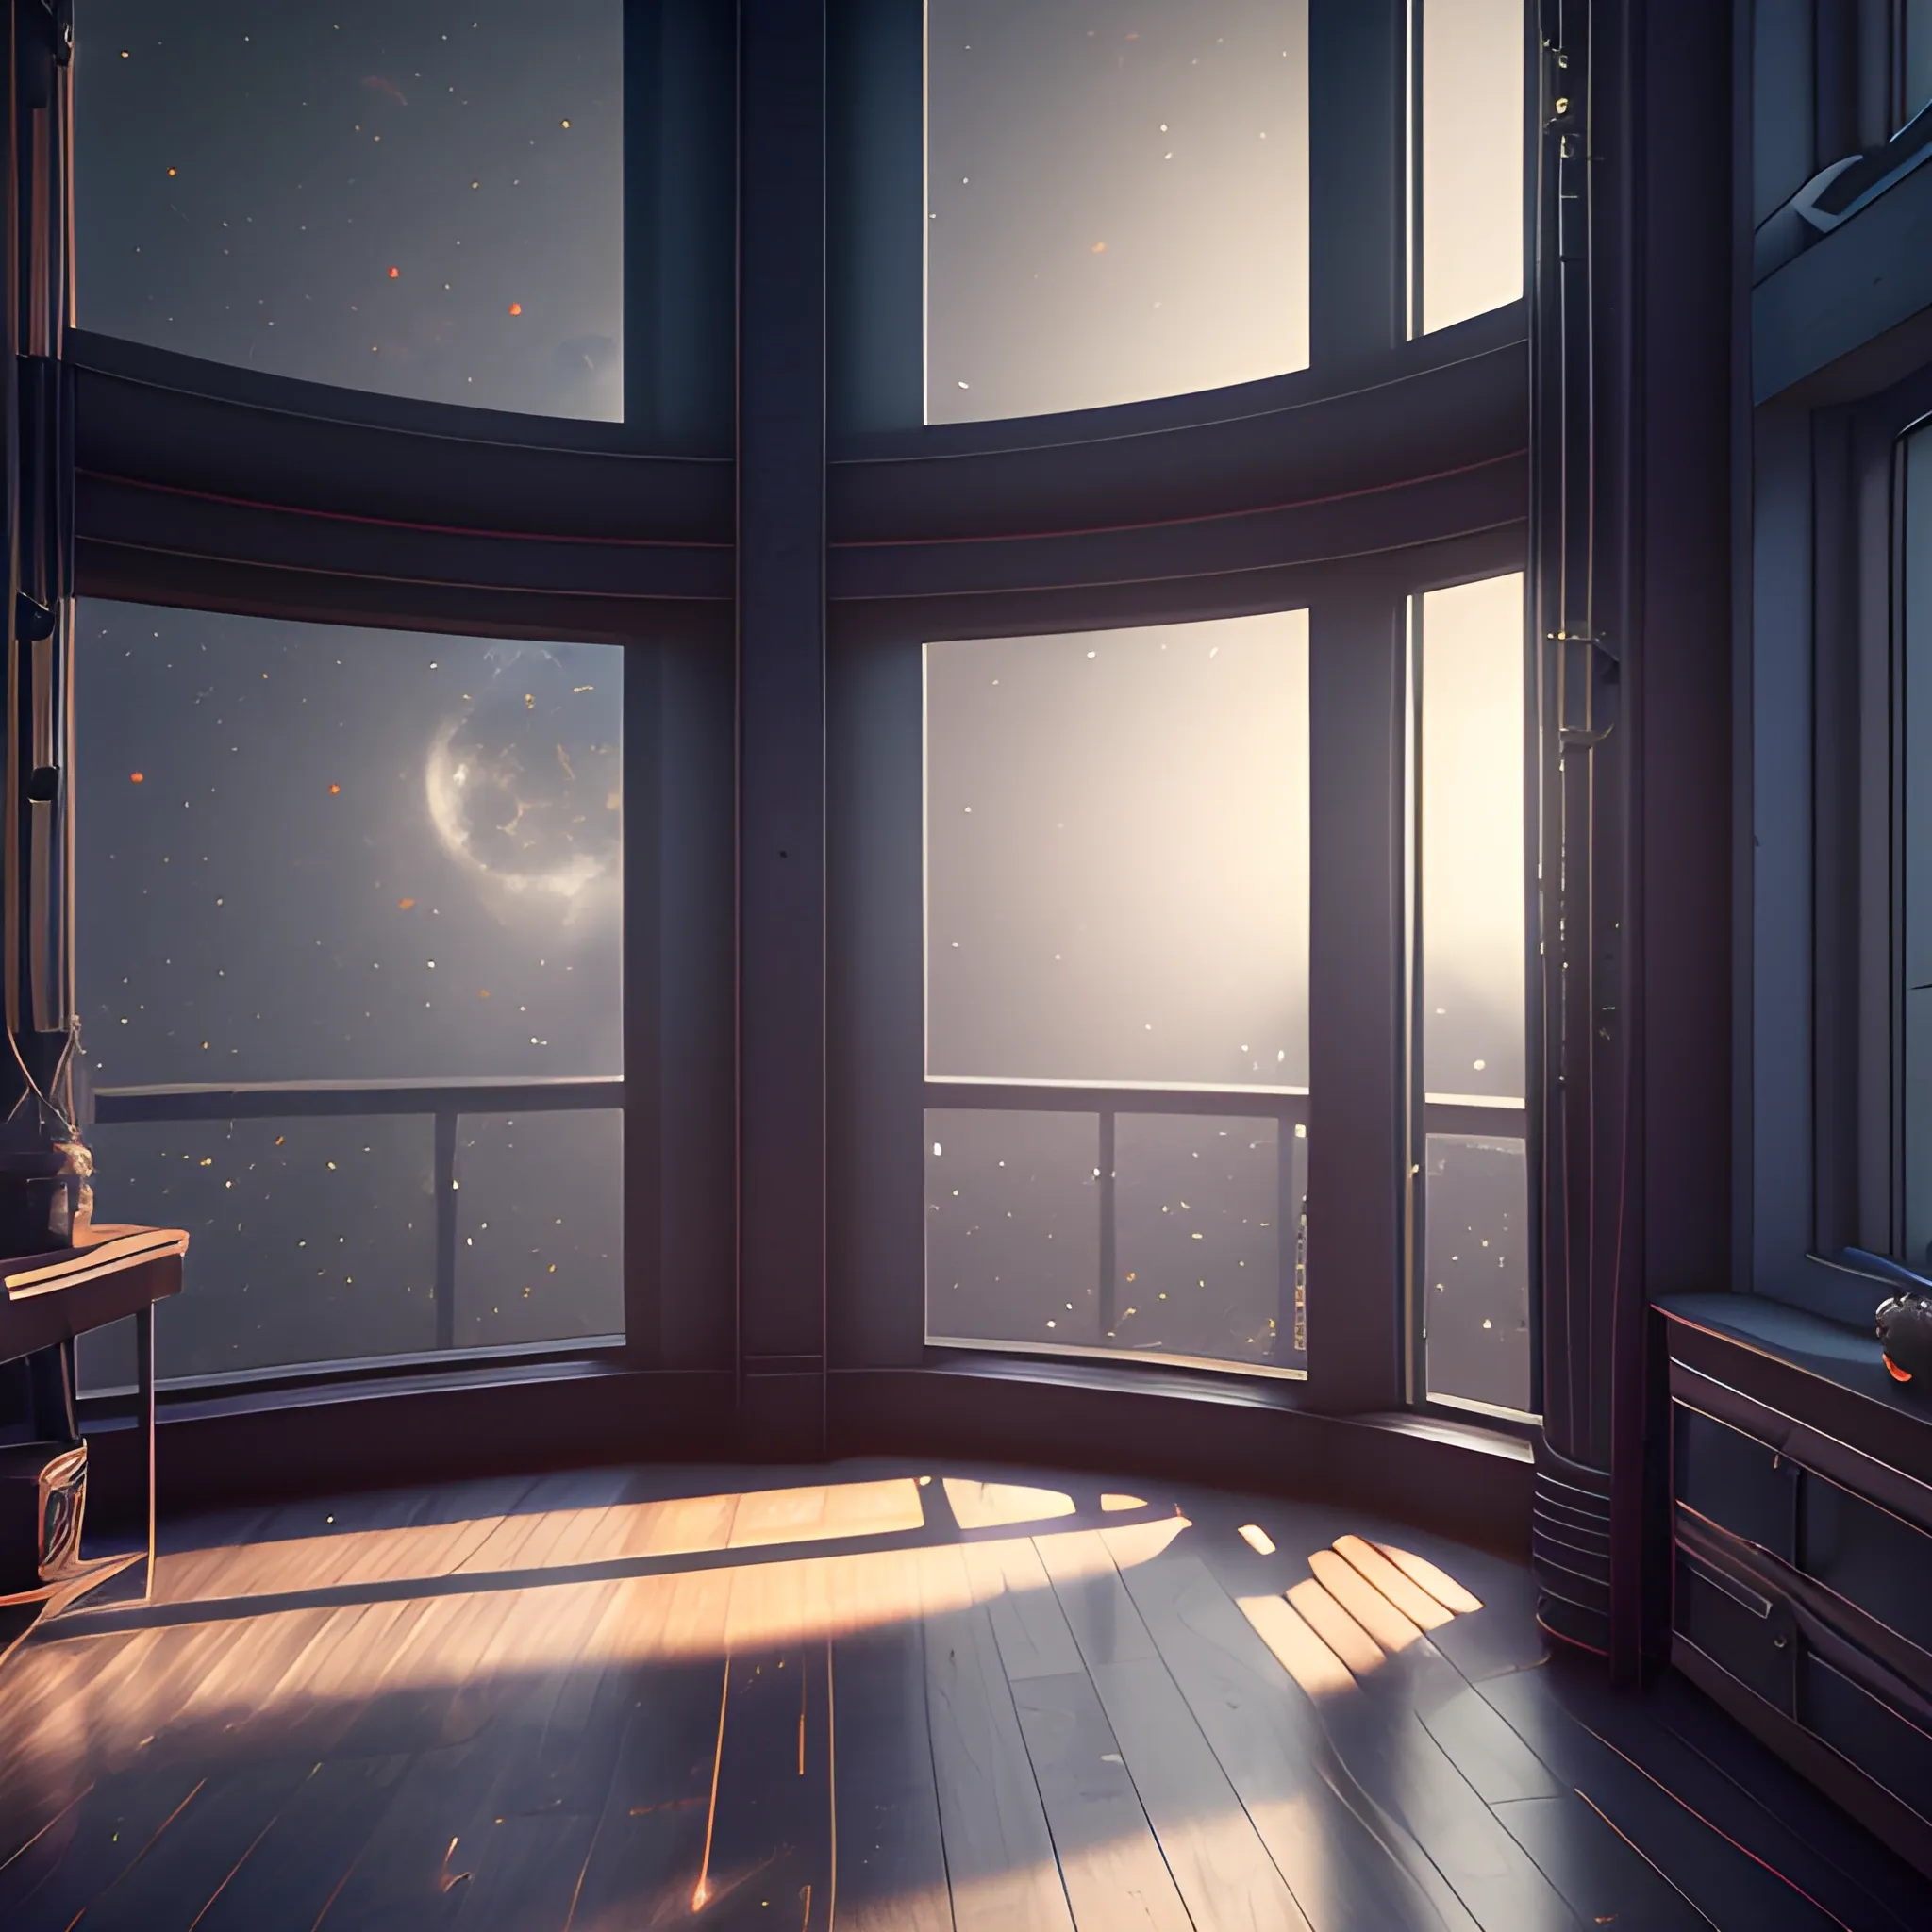 Interior of an astronomy tower set in a dark and moody lighting, open balcony, Highly detailed, 8k wallpaper, HDR, unreal engine 5, 4k, 8k, ray tracing, bloom, lens flare